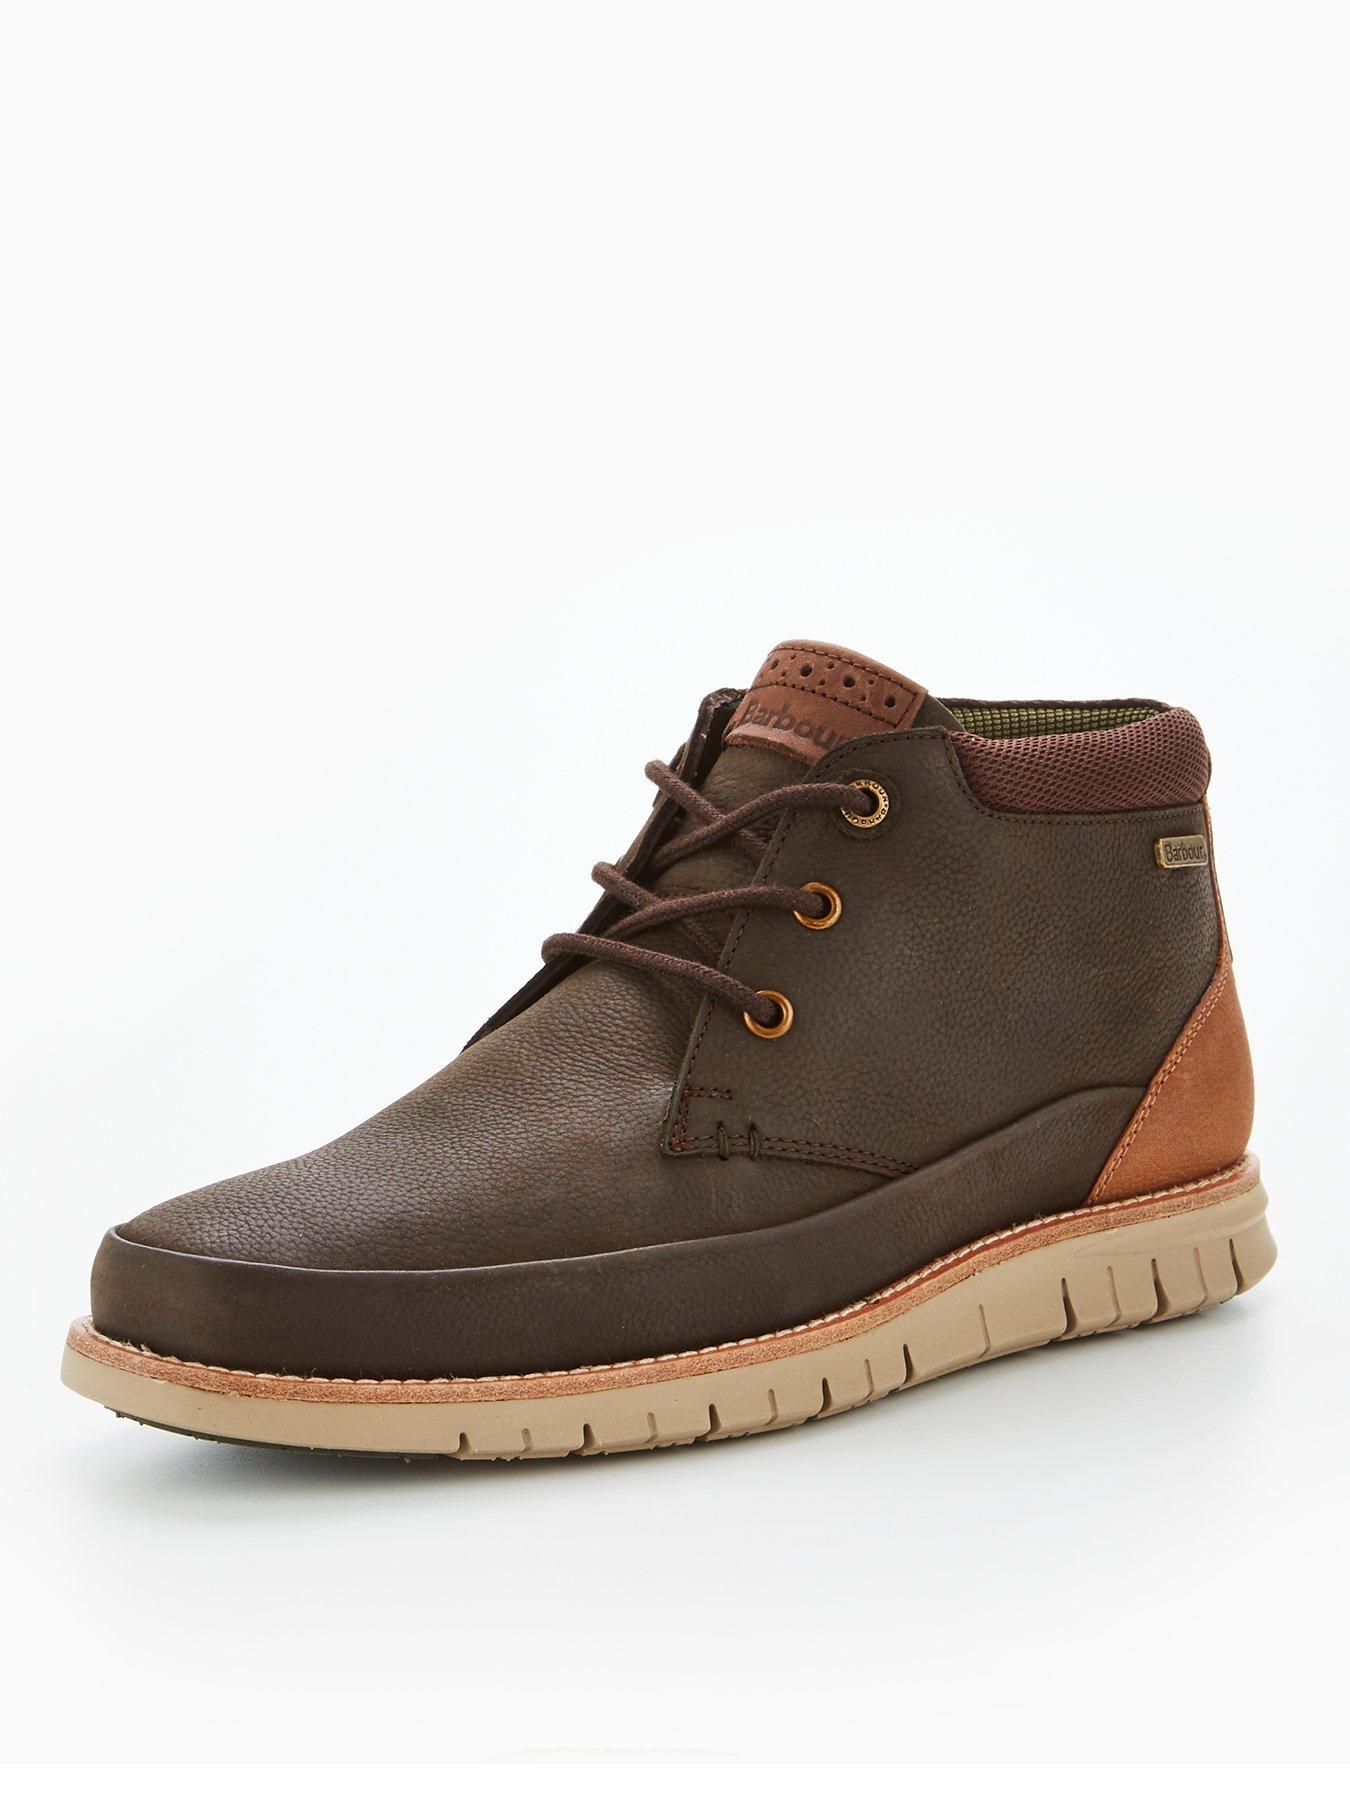 Mens Boots | Shop Mens Boots at Very.co.uk